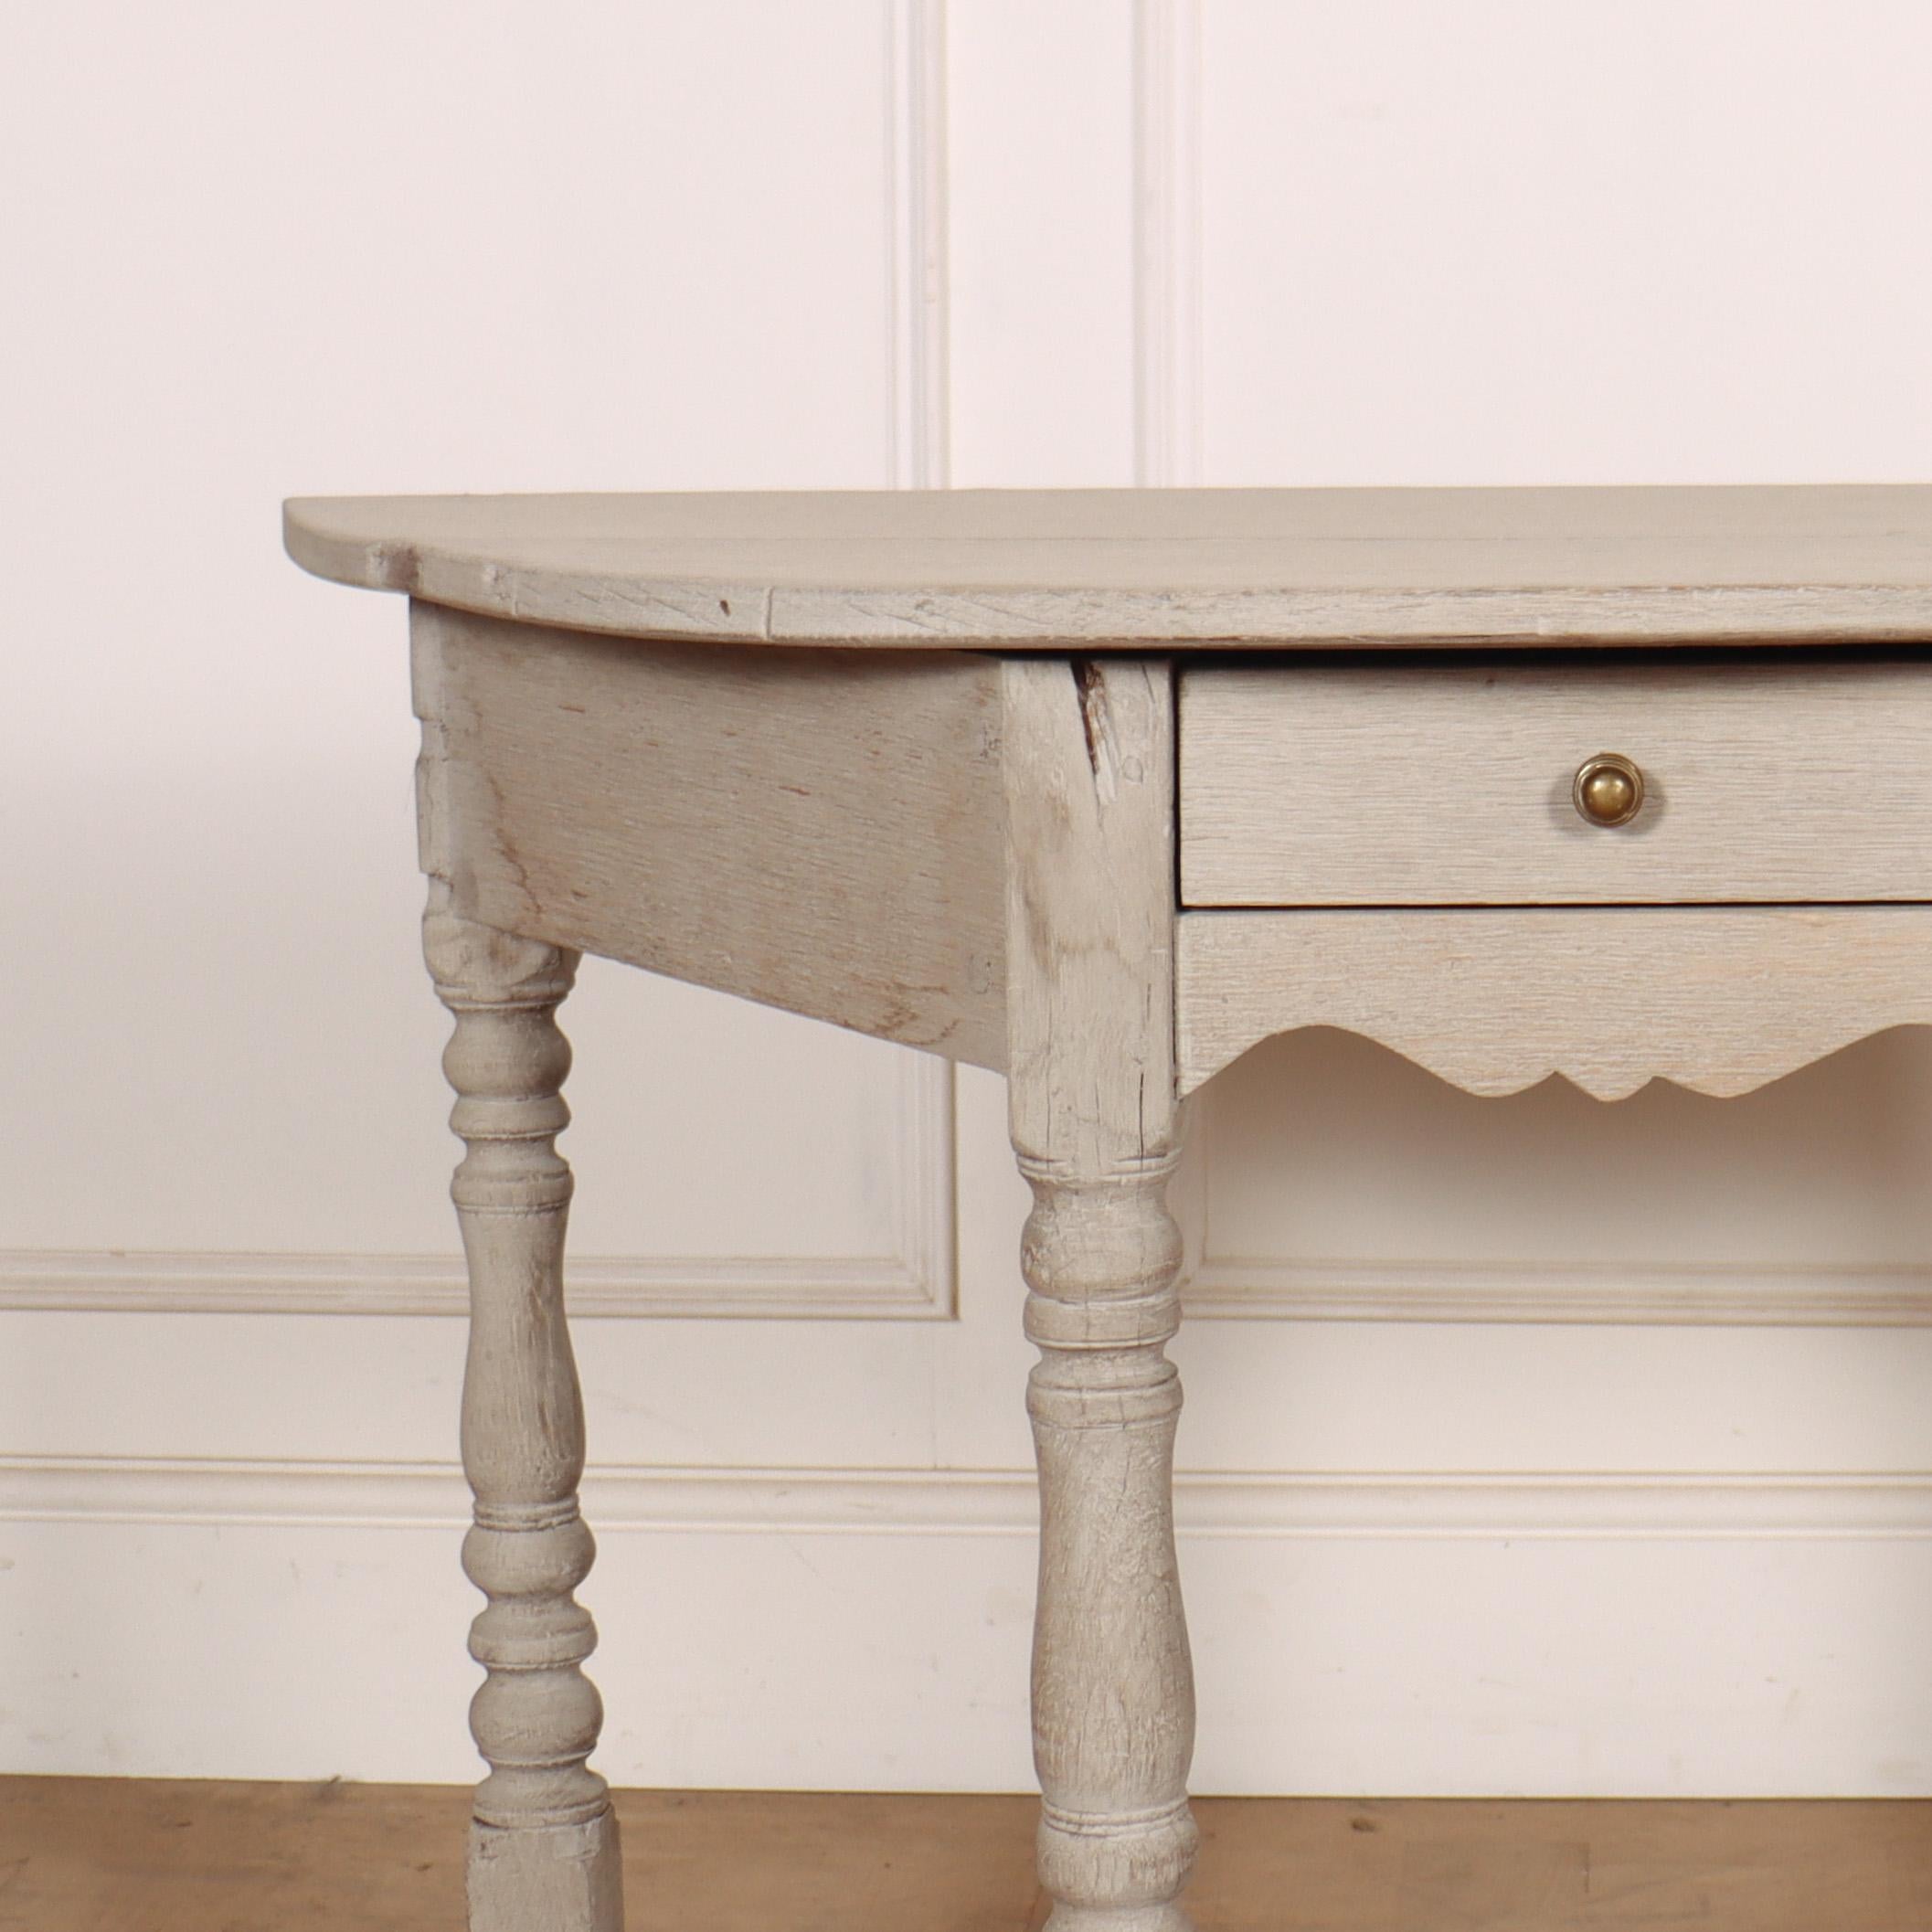 English bleached oak one drawer demi-lune console table made from 18th C components. 1800.

Reference: 8061

Dimensions
39 inches (99 cms) Wide
19 inches (48 cms) Deep
28.5 inches (72 cms) High